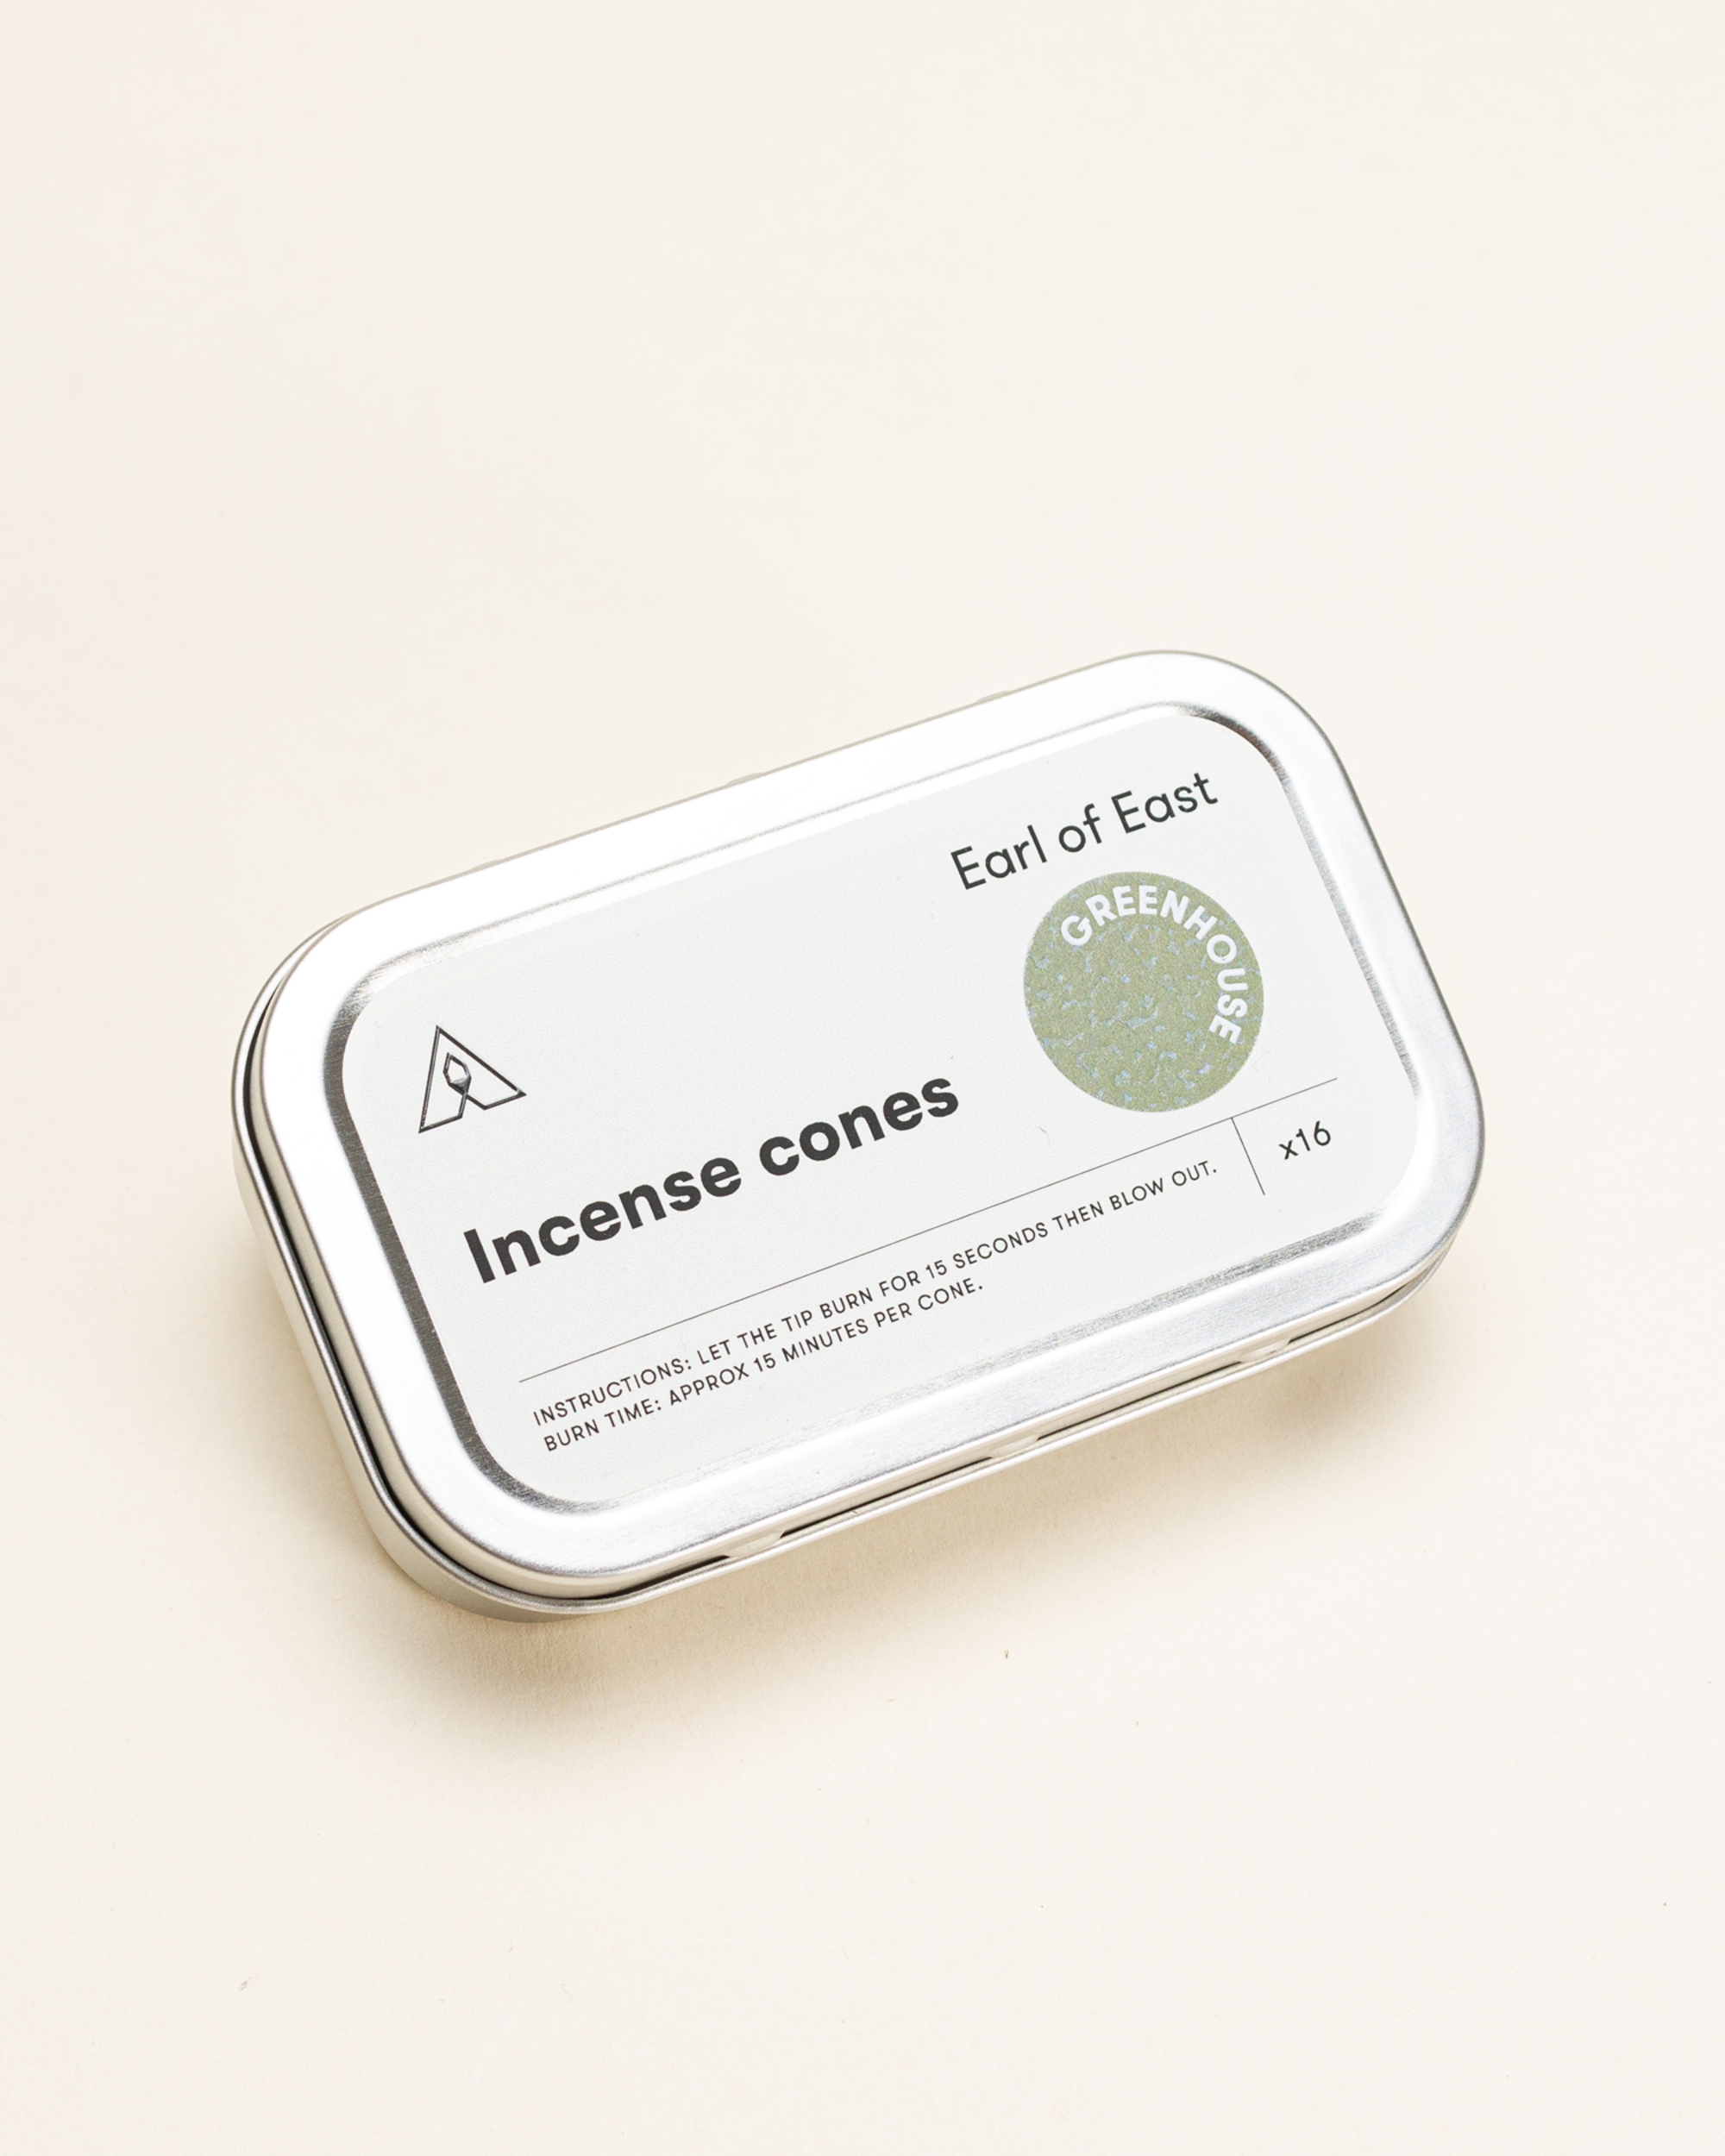 Earl Of East Incense Cones - Greenhouse